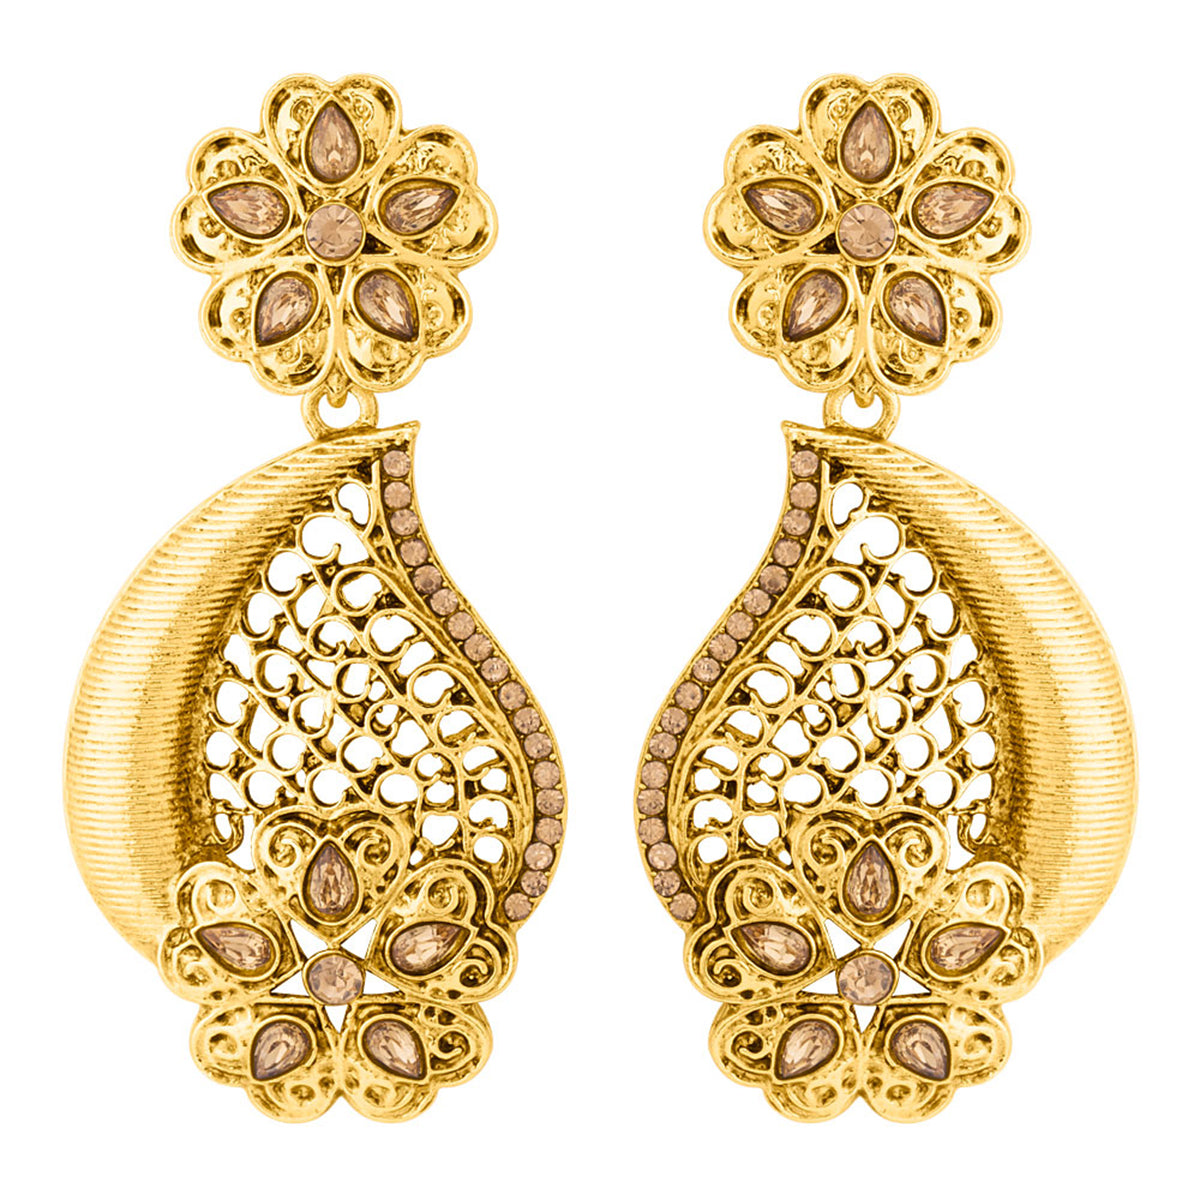 Artistic Paisley Earrings with Floral Motifs